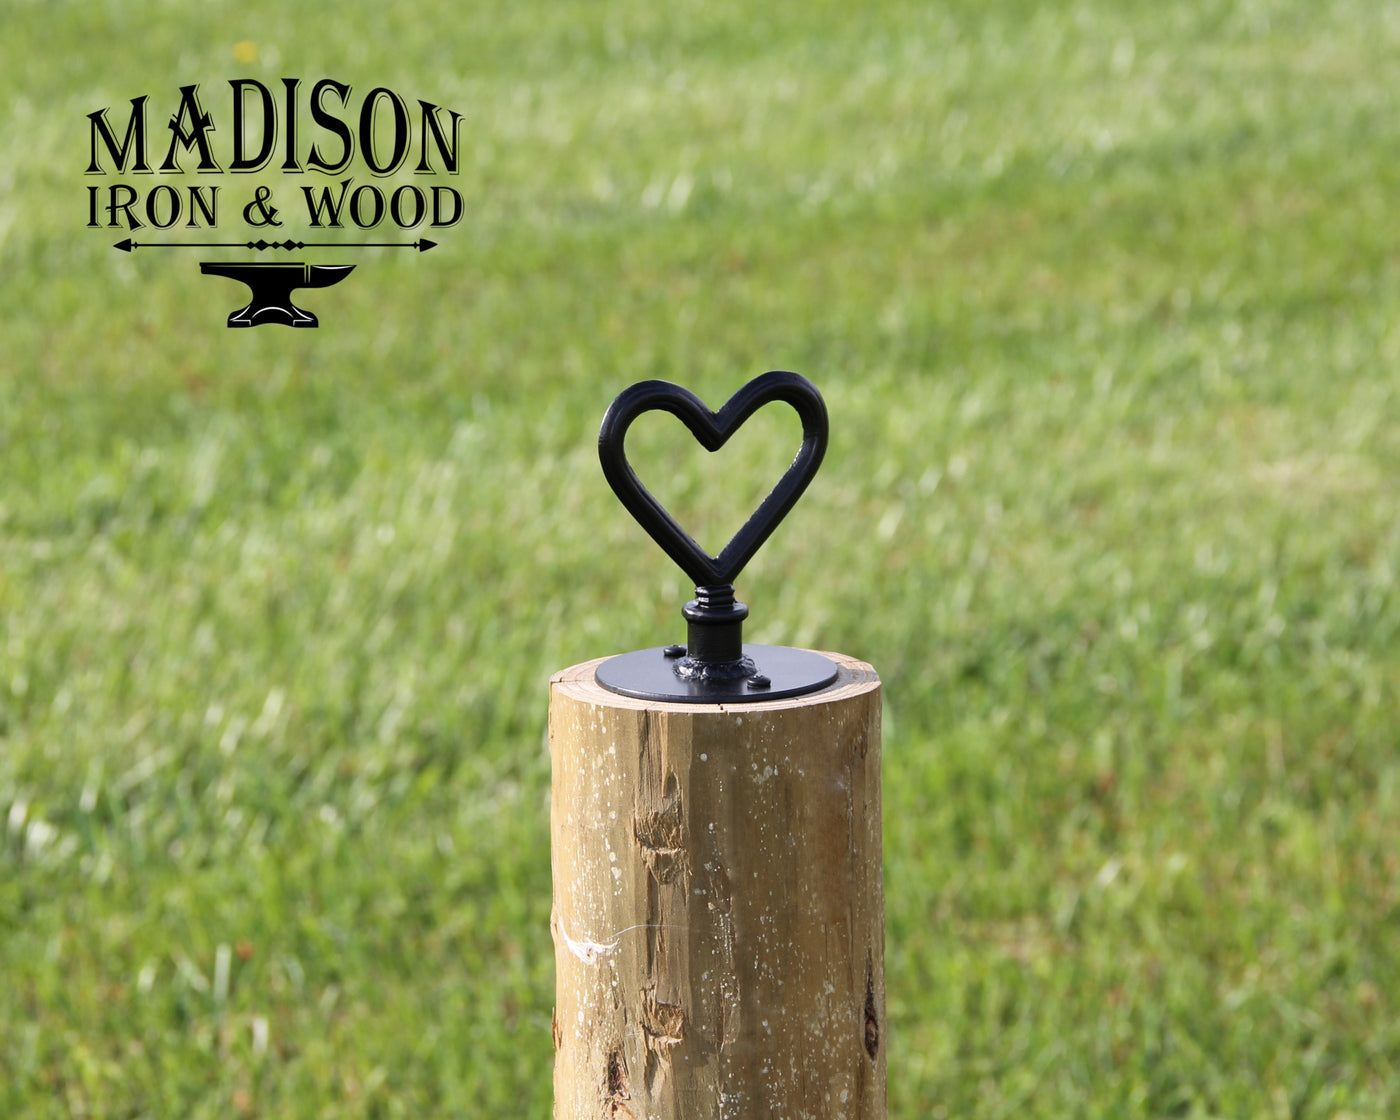 Heart Post Top For Round Wood Fence Post - Madison Iron and Wood - Post Cap - metal outdoor decor - Steel deocrations - american made products - veteran owned business products - fencing decorations - fencing supplies - custom wall decorations - personalized wall signs - steel - decorative post caps - steel post caps - metal post caps - brackets - structural brackets - home improvement - easter - easter decorations - easter gift - easter yard decor